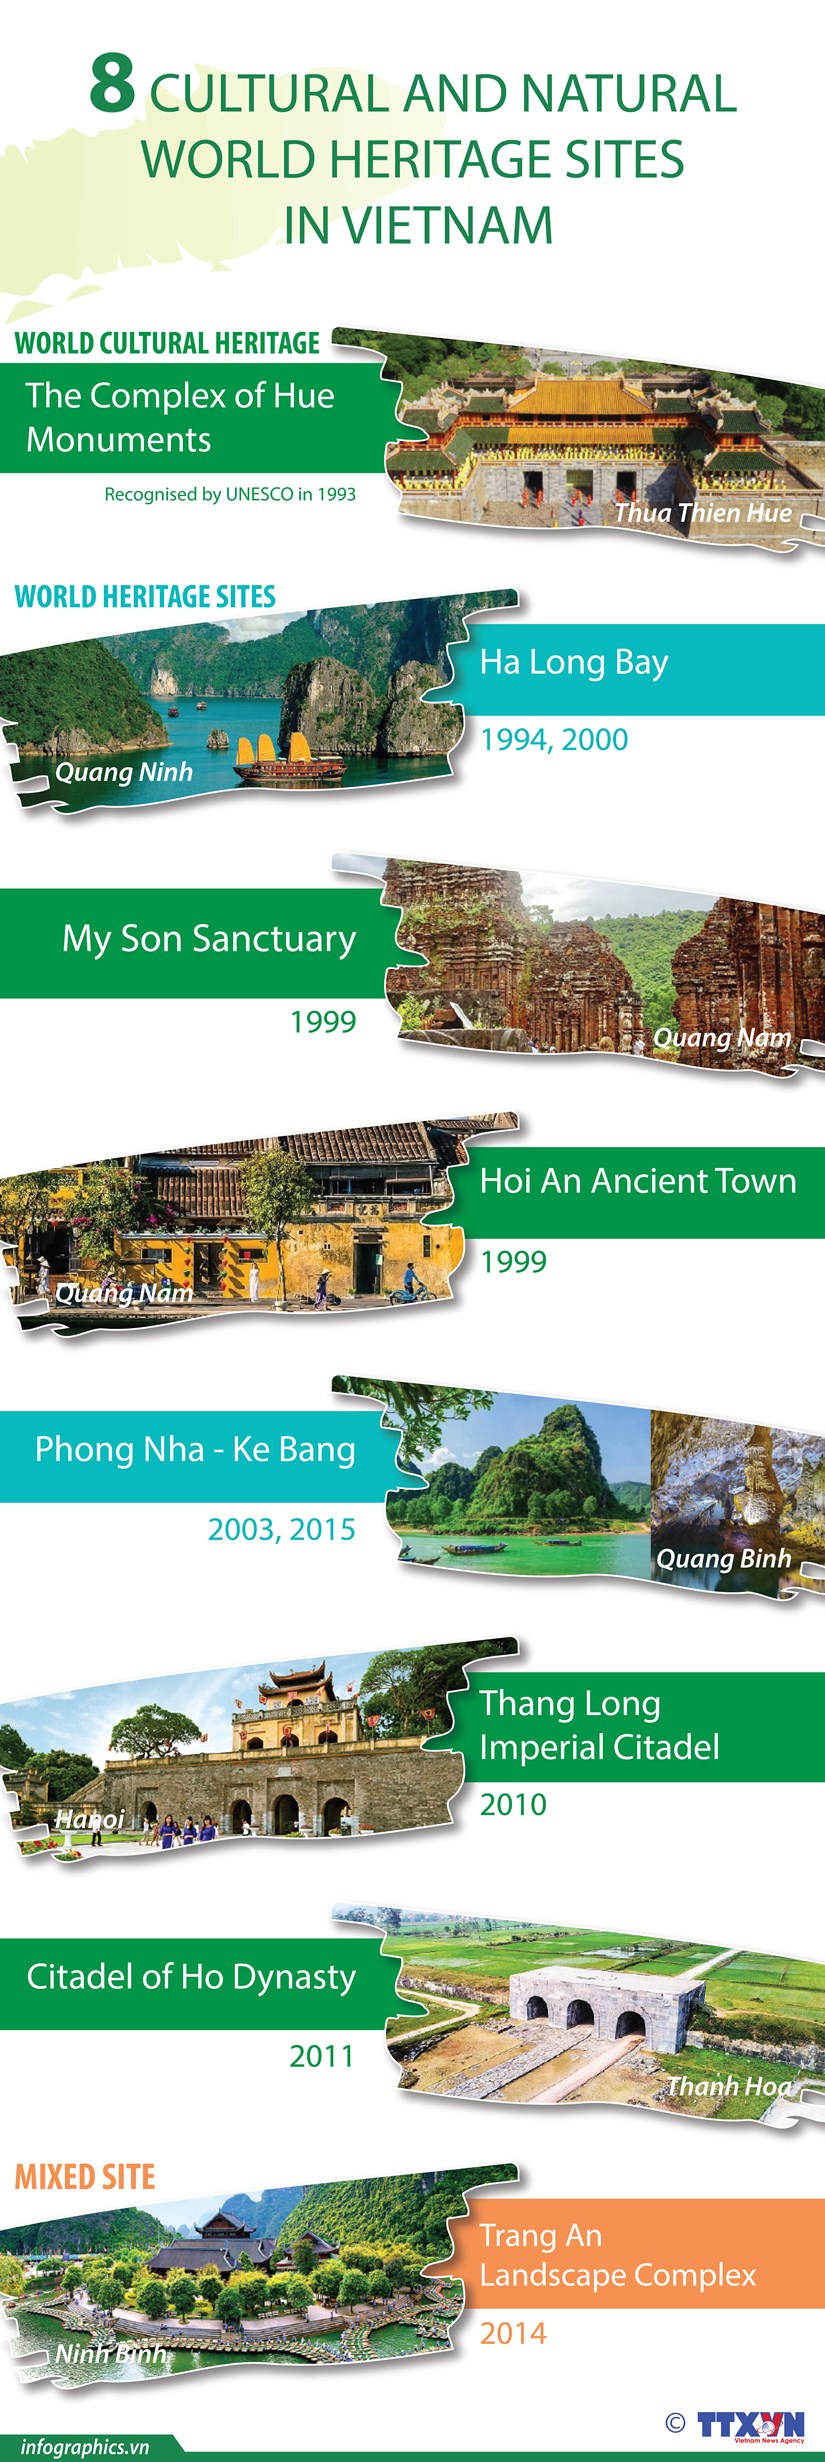 Eight cultural and natural world heritage sites in Vietnam hinh anh 1